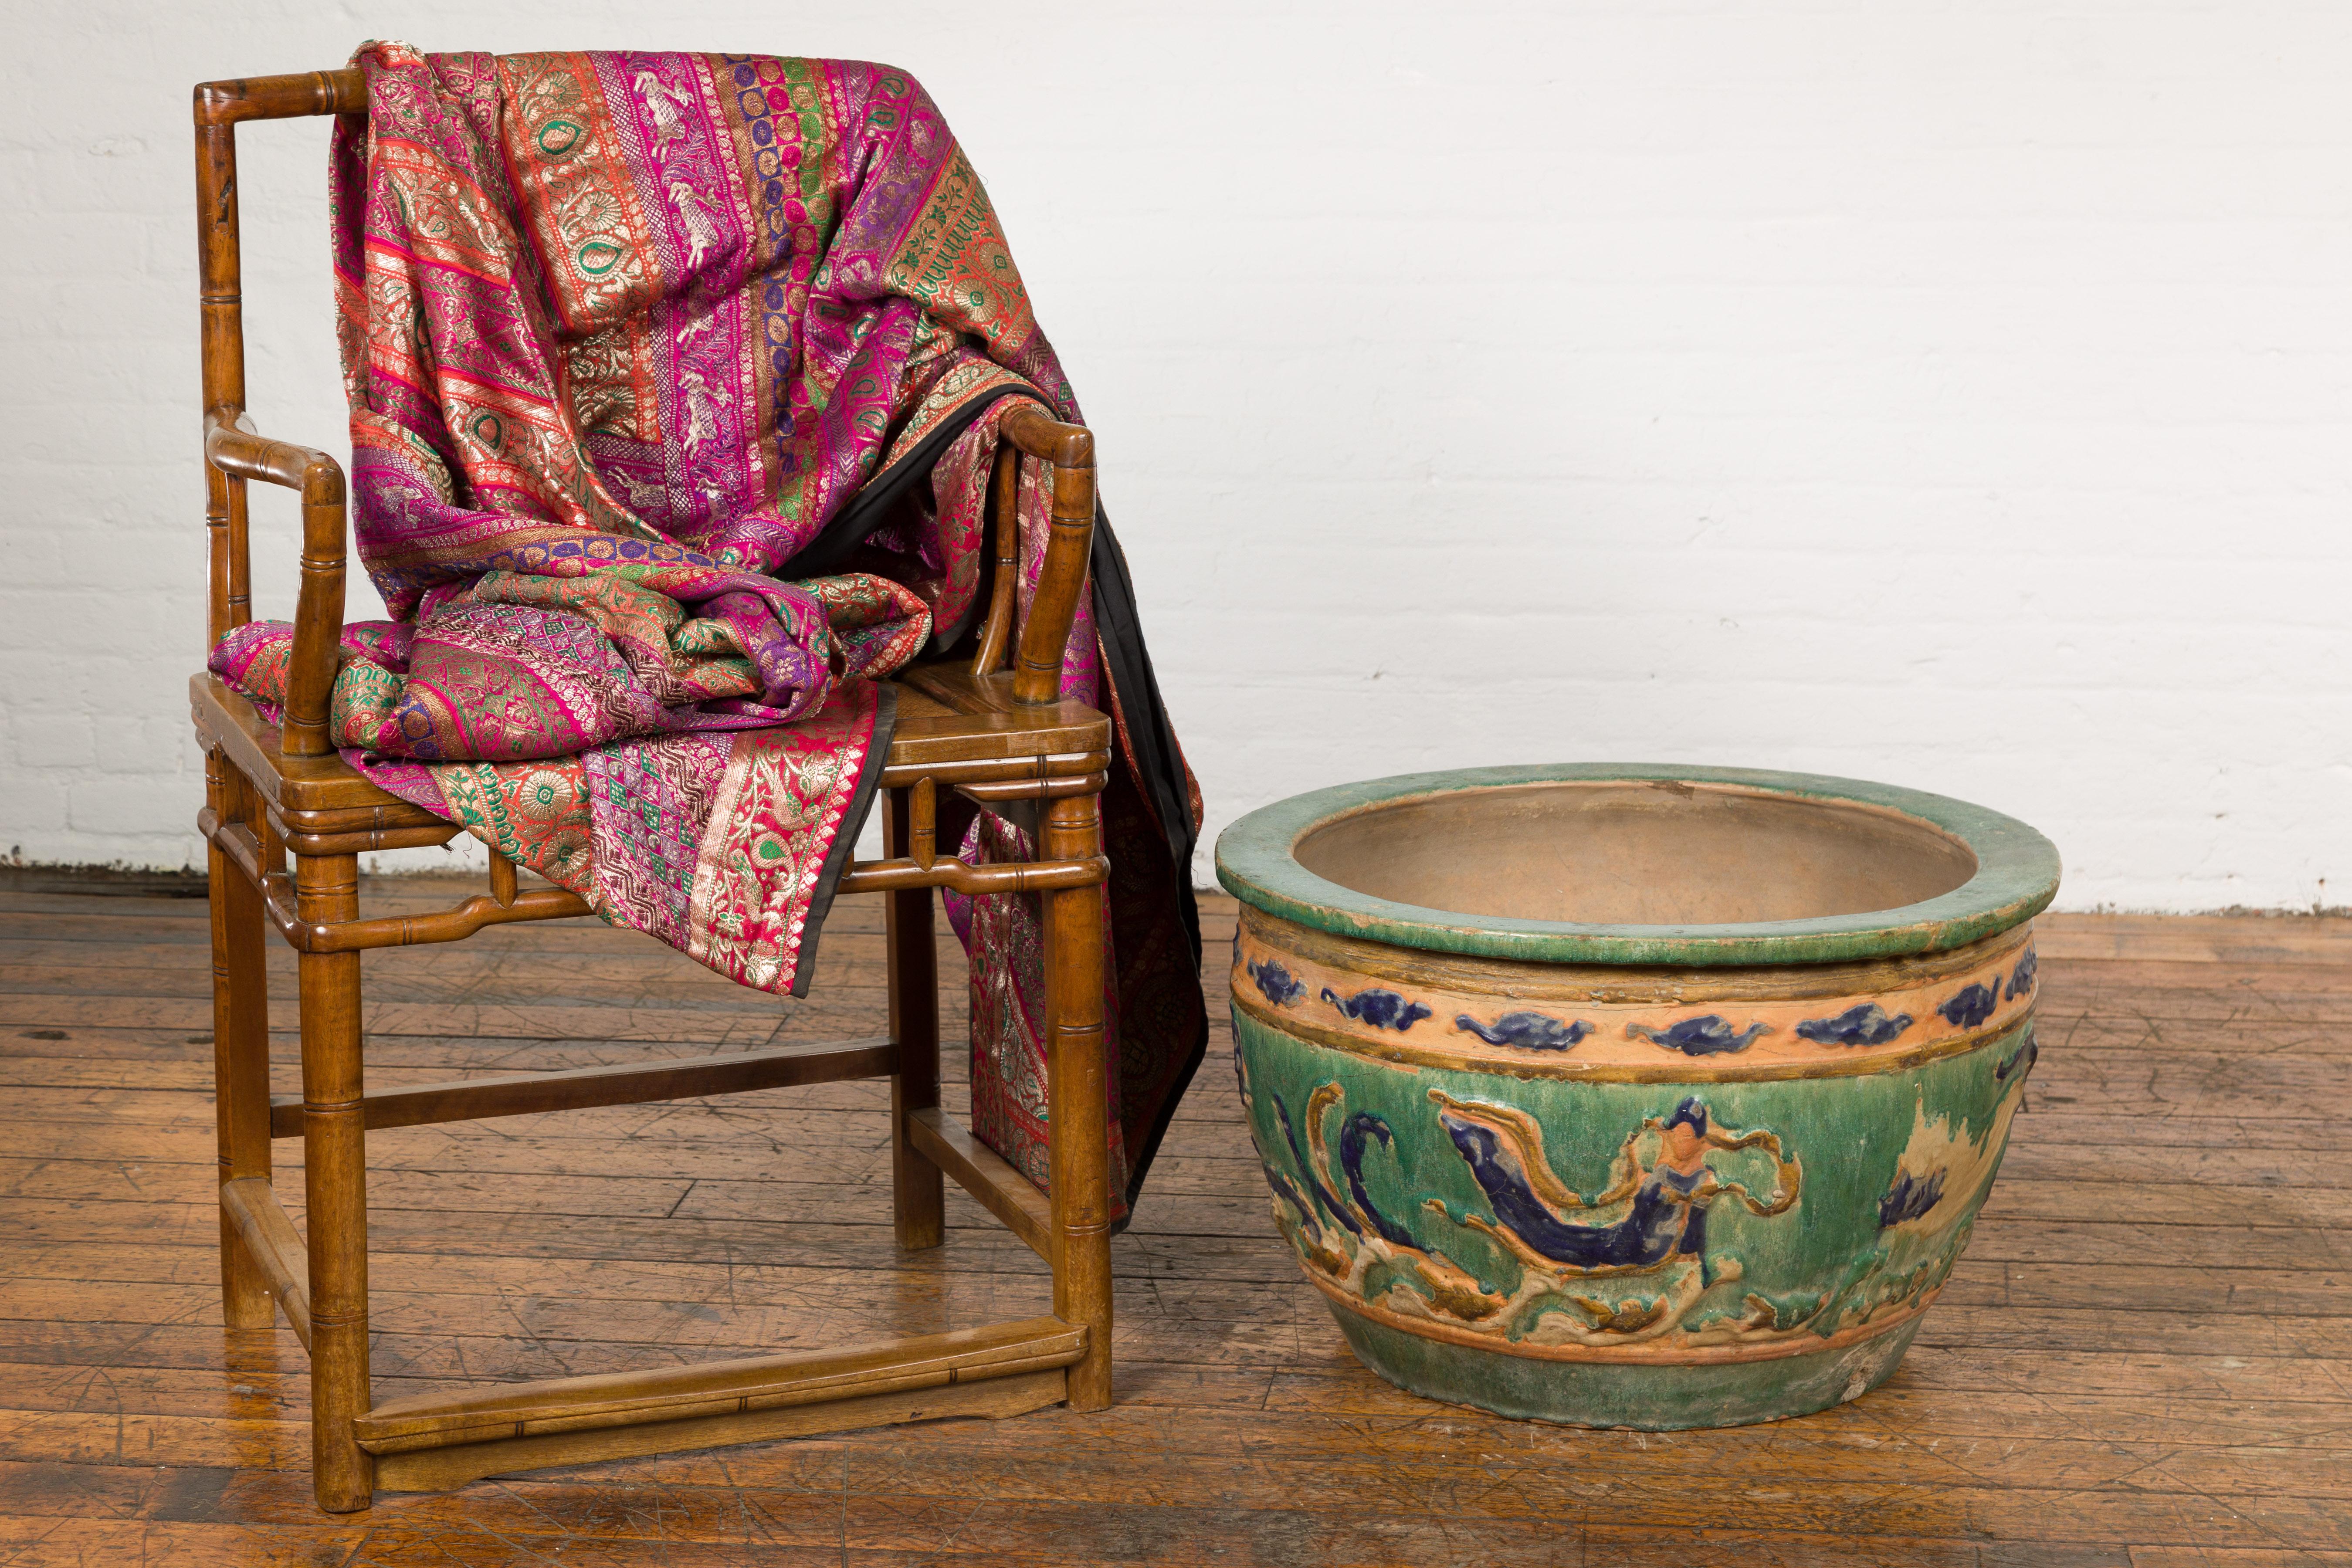 An antique 19th century Annamese green, blue and ocher planter from Vietnam with scrolling decor, clouds, traces of dragon motifs and distressed patina. Handcrafted in Vietnam during the 19th century, this planter features a circular Silhouette